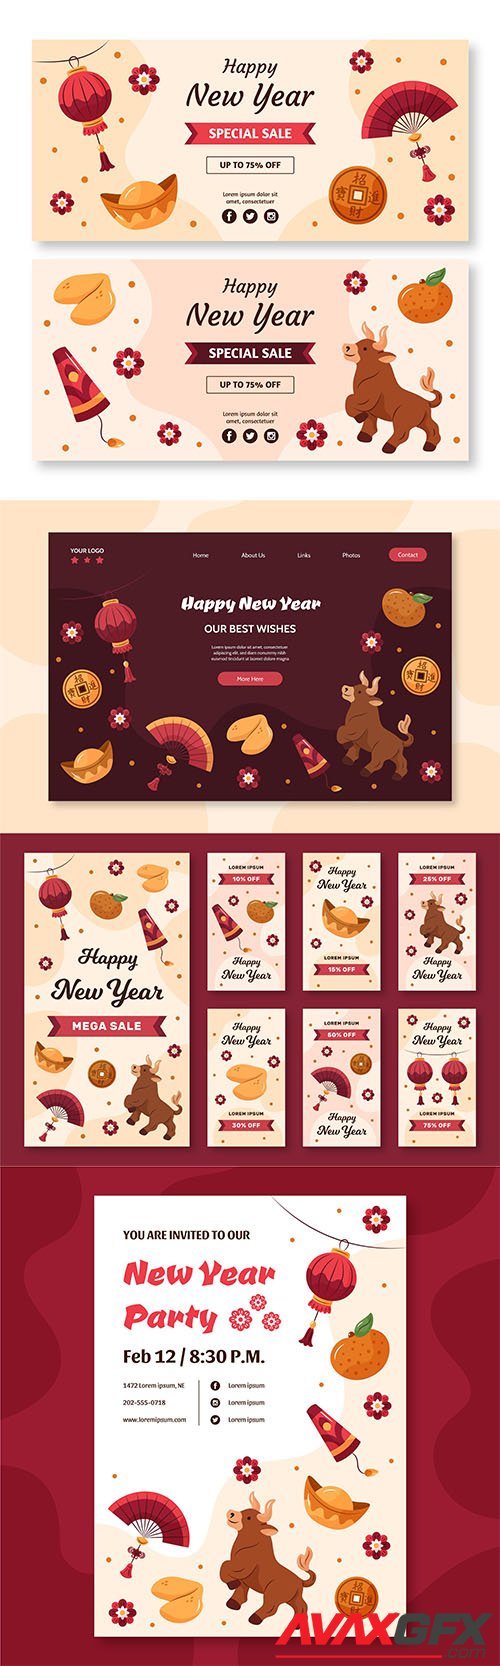 Hand-drawn instagram stories, banner,landing page collection chinese new year ox